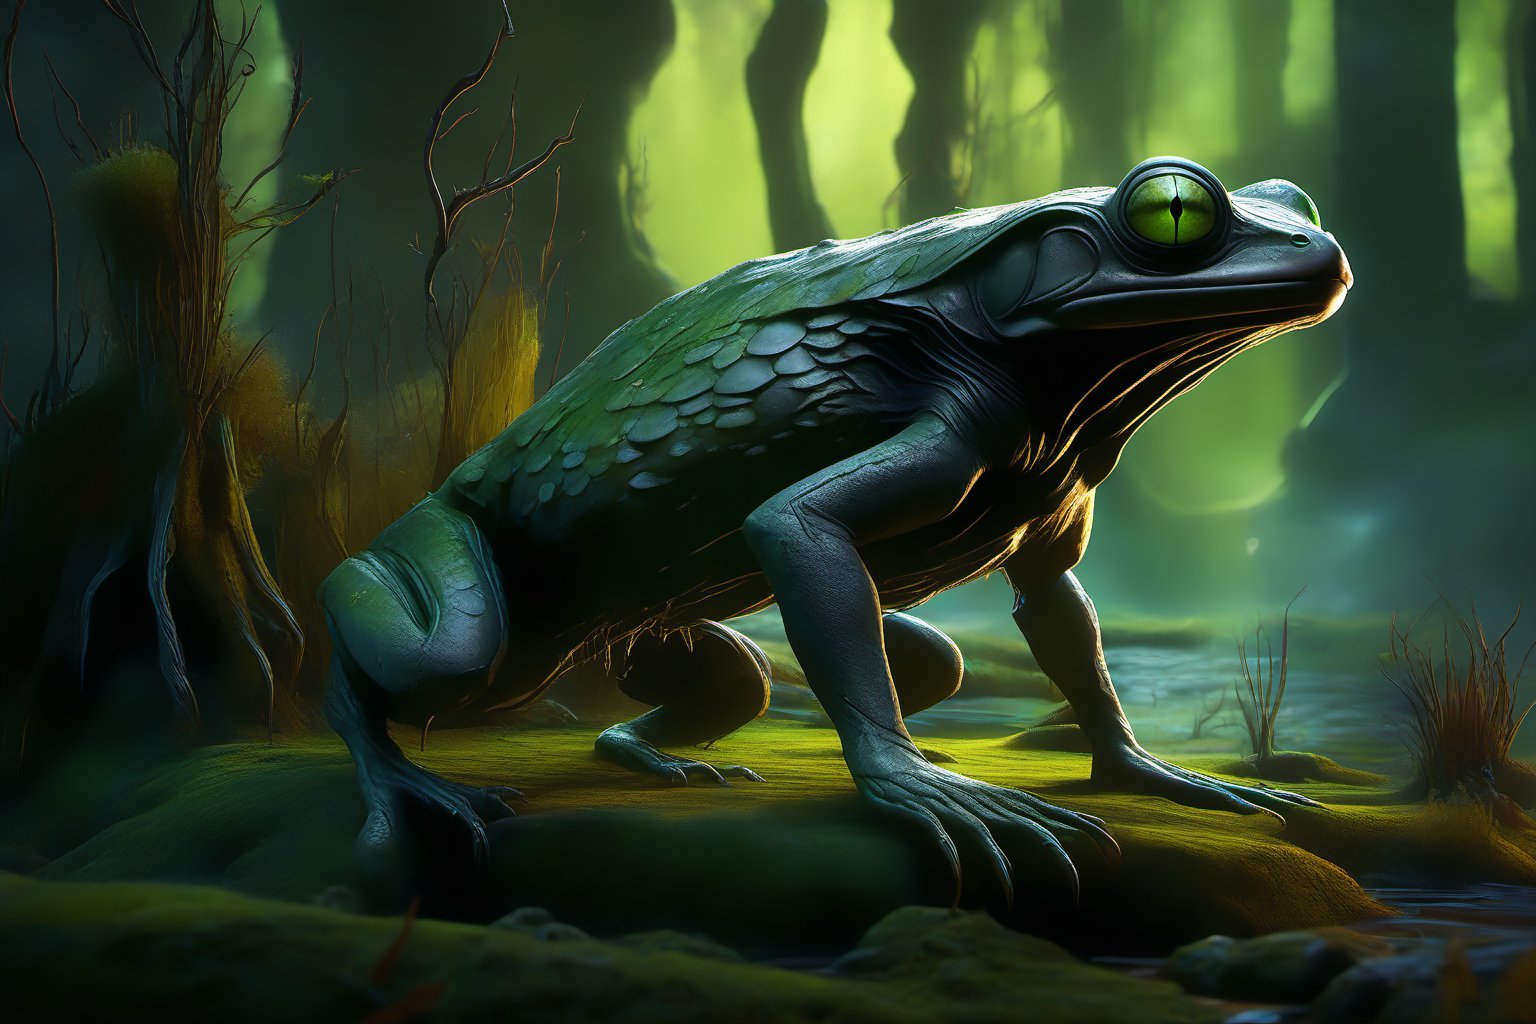 A creature with a striking fusion of canine and amphibian features: the upper half resembles a sleek dog, while the lower half morphs into a green frog-like being. The camera frames the subject from a low angle, emphasizing its imposing stature as it stands on a moss-covered stone pedestal amidst a misty forest glade. Soft, diffused light highlights the creature's intricate textures and scaly patterns.